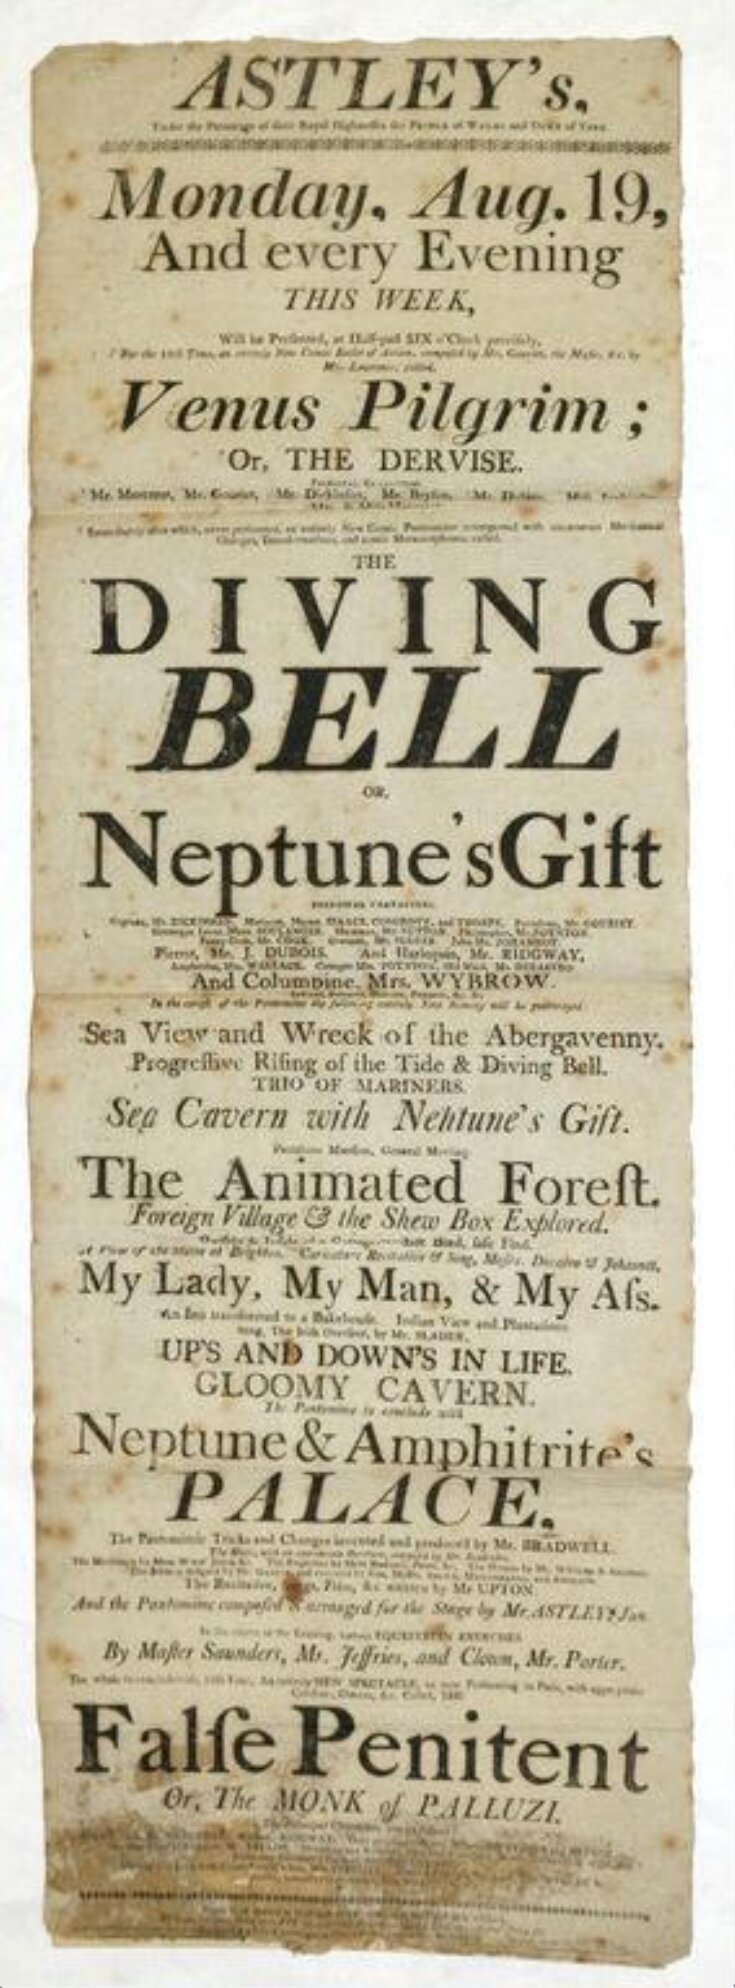 The Diving Bell; or, Neptune's Gift image